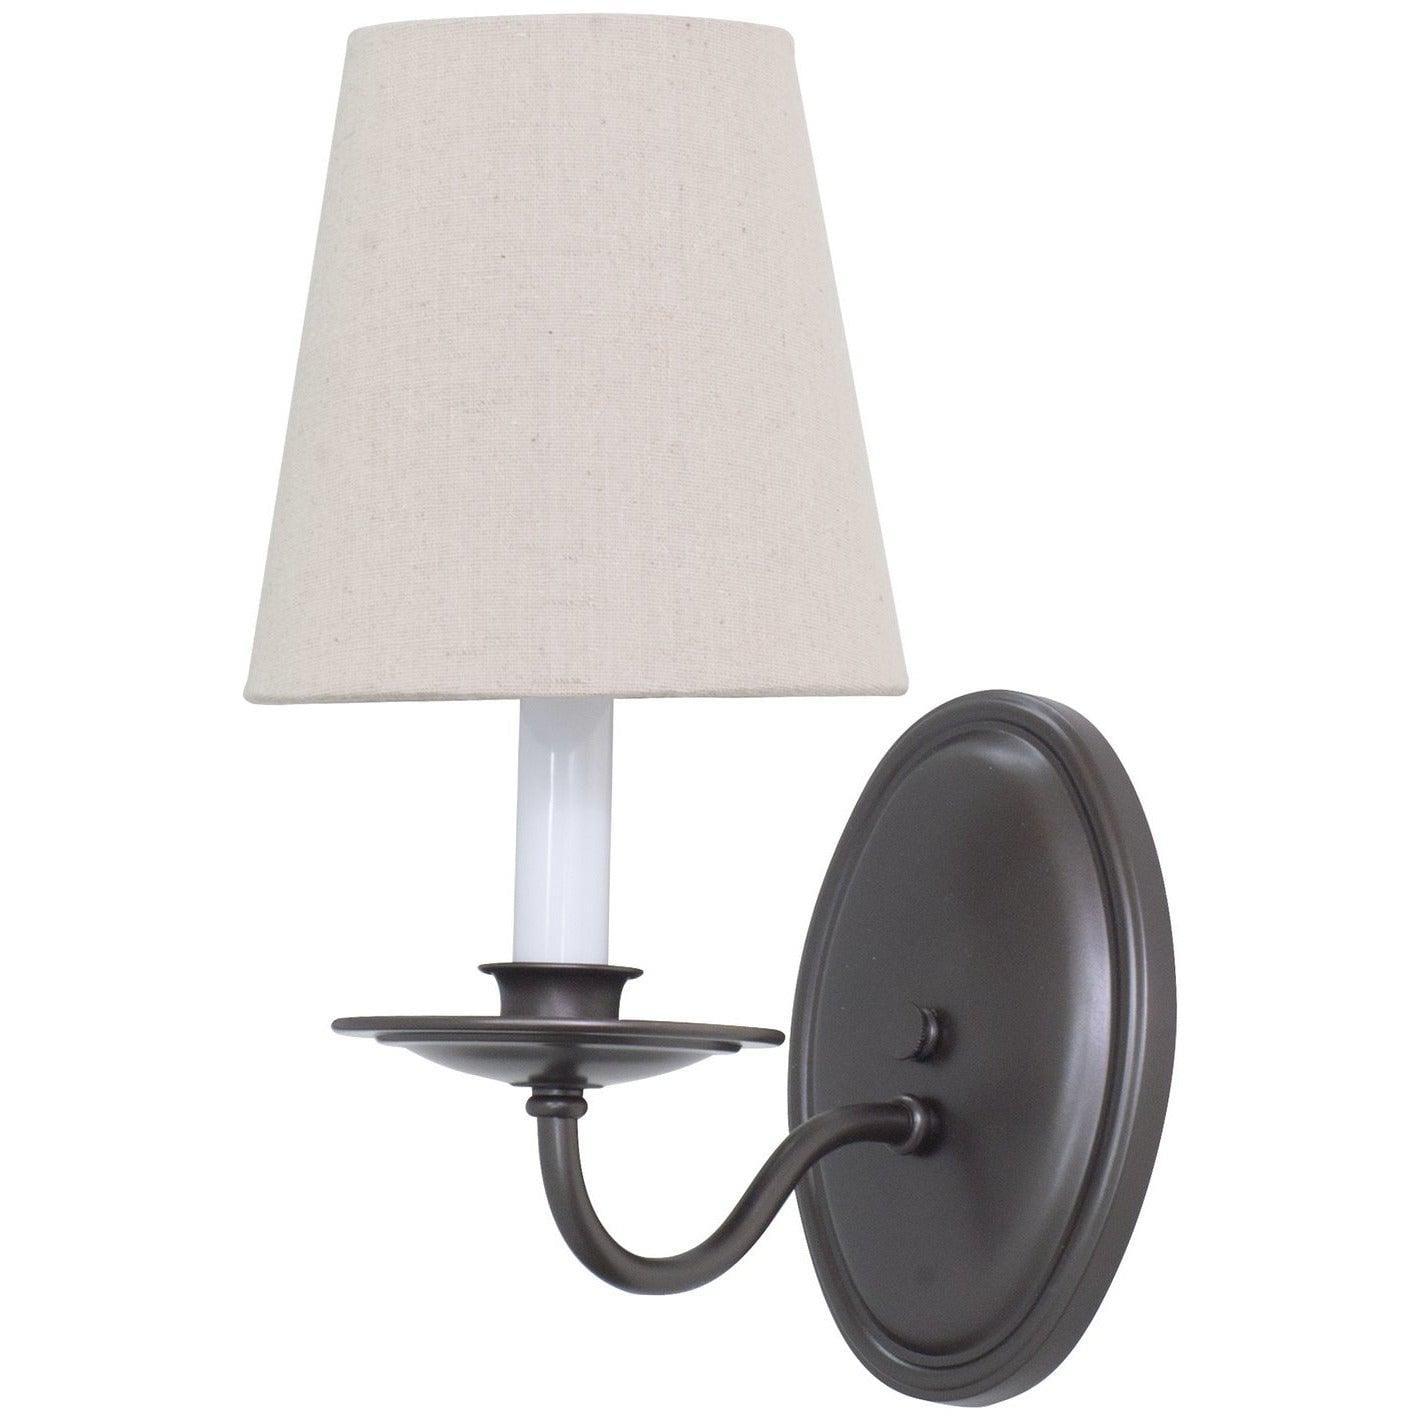 House of Troy - Lake Shore 5-Inch One Light Wall Sconce - LS217-MB | Montreal Lighting & Hardware